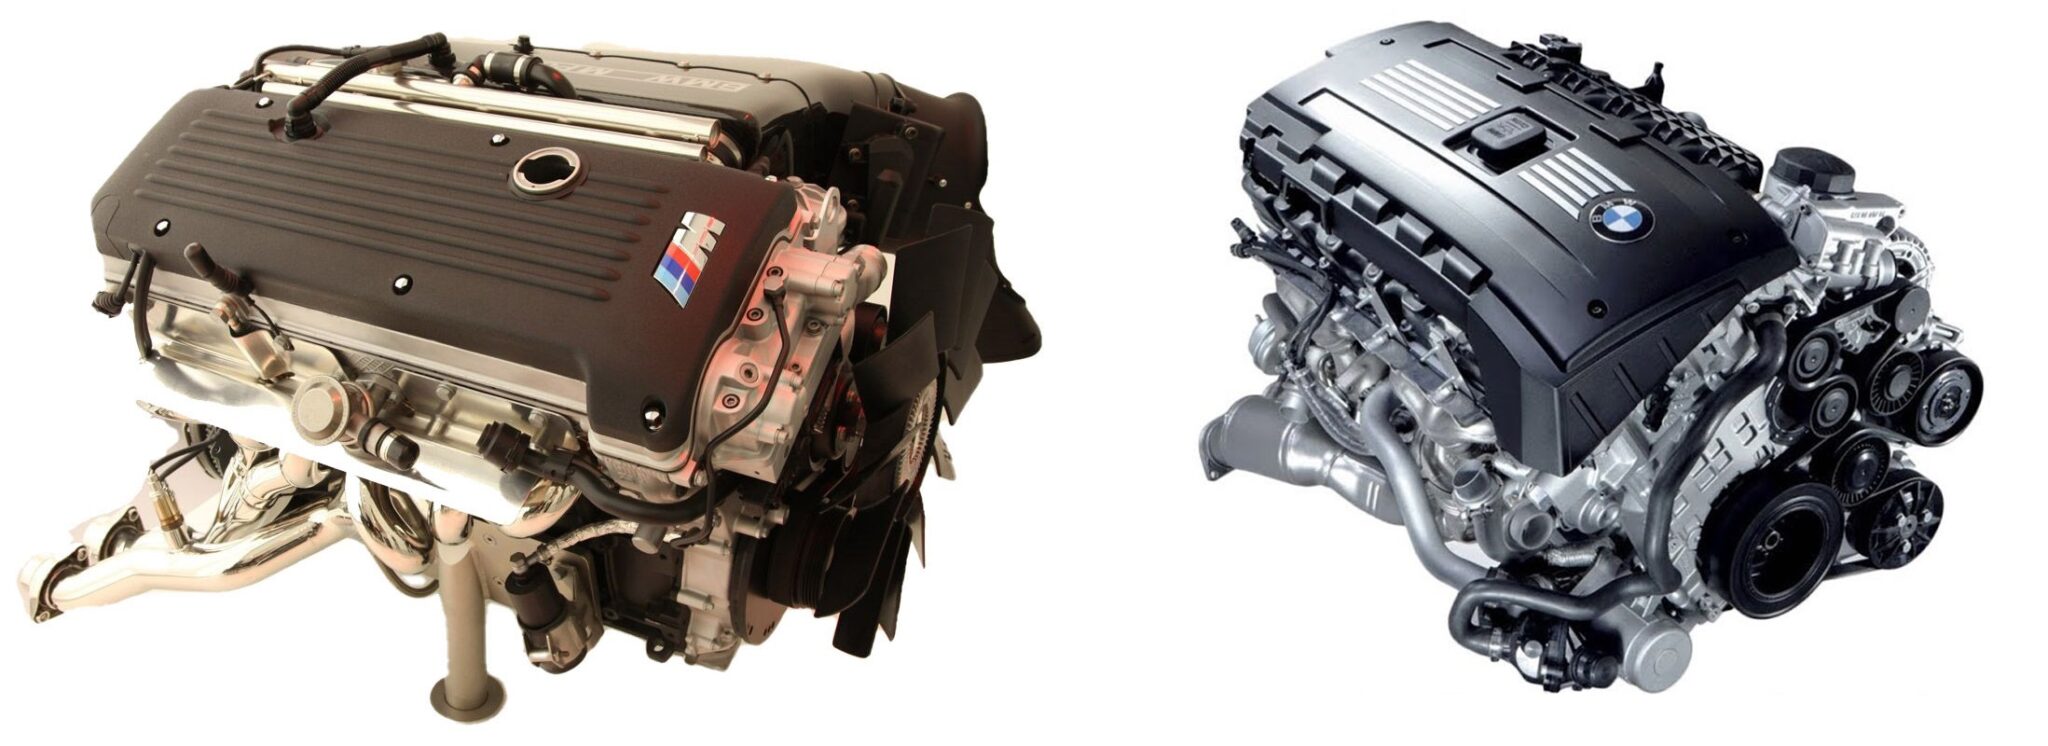 BMW S54 vs. N54 Comparison: Performance, Tuning, Reliability & Sound